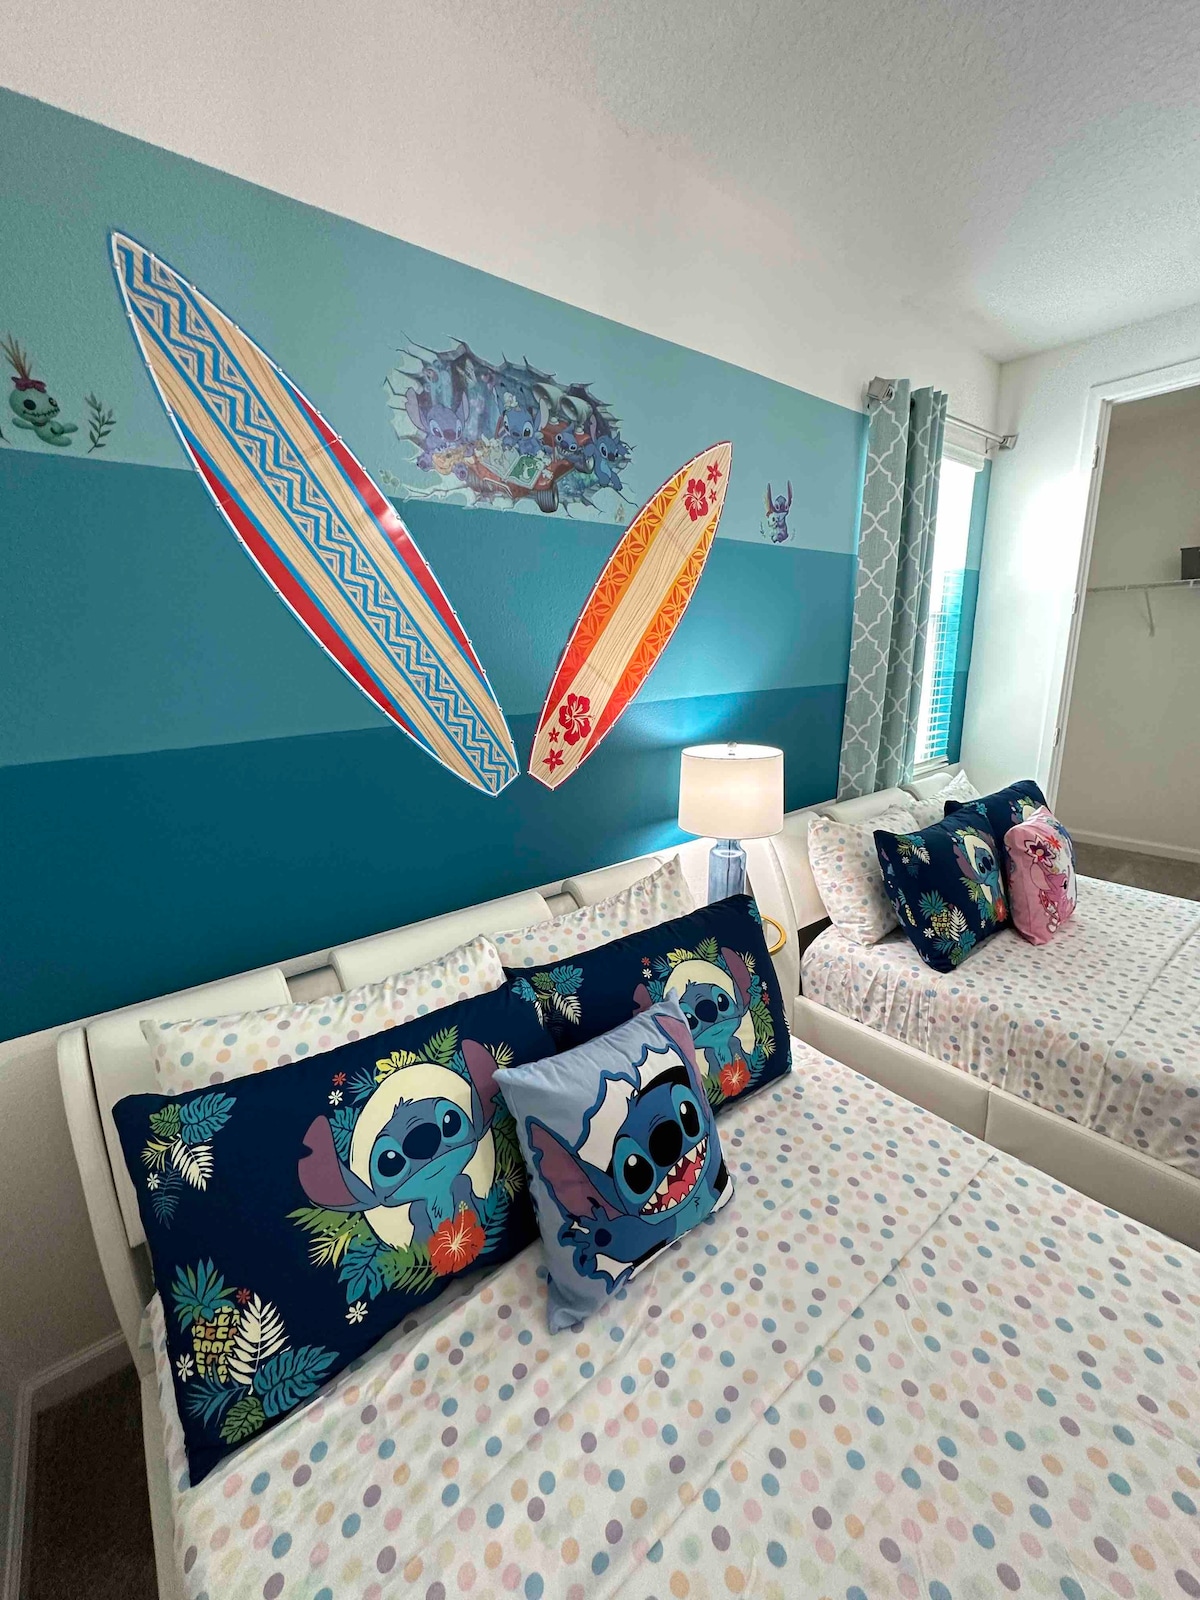 Lilo & Stitch Room for 4 People.